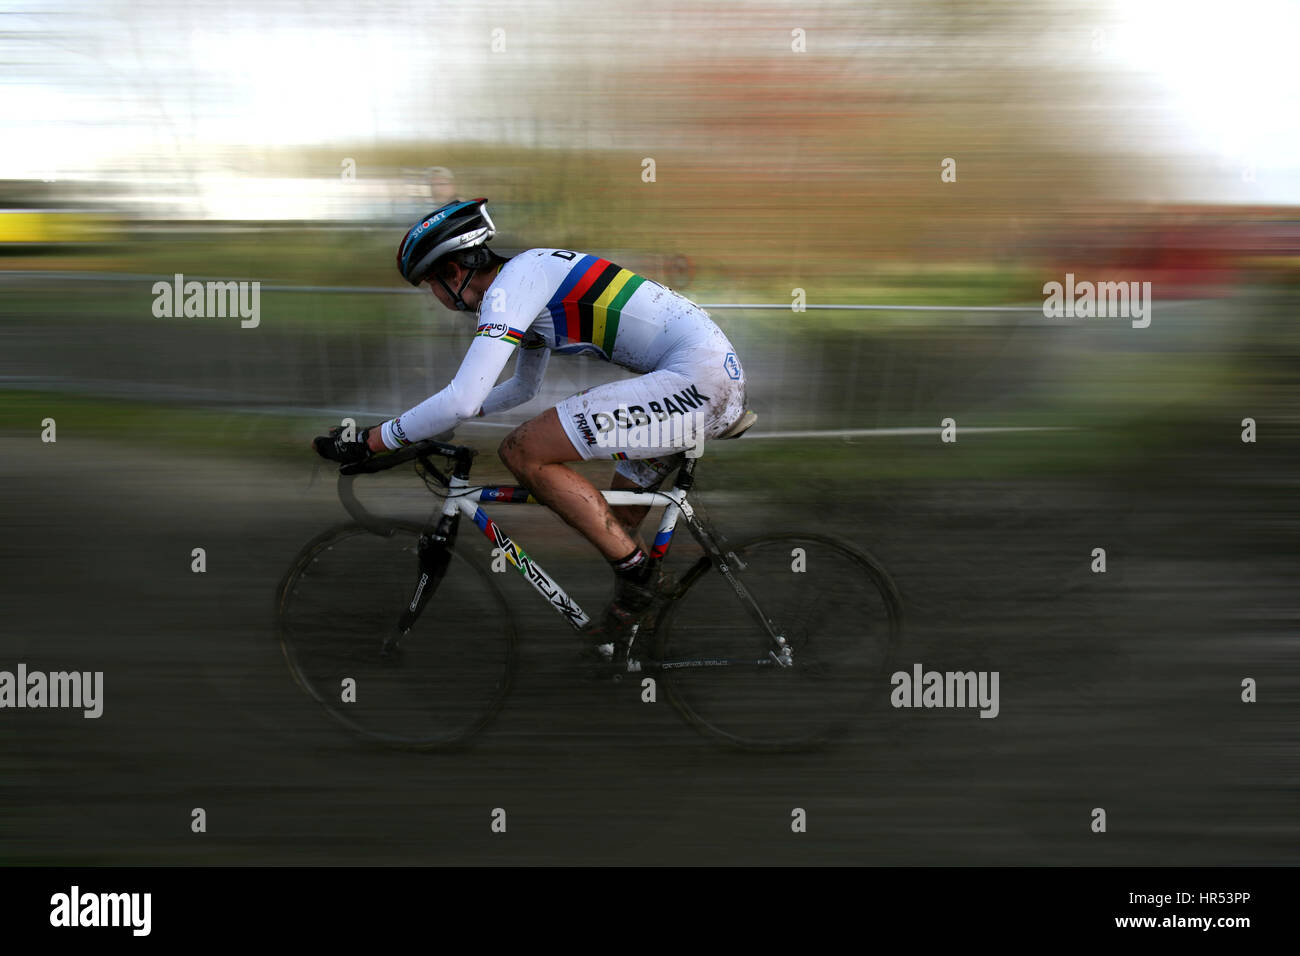 marianne vos is world champion bicycler Stock Photo